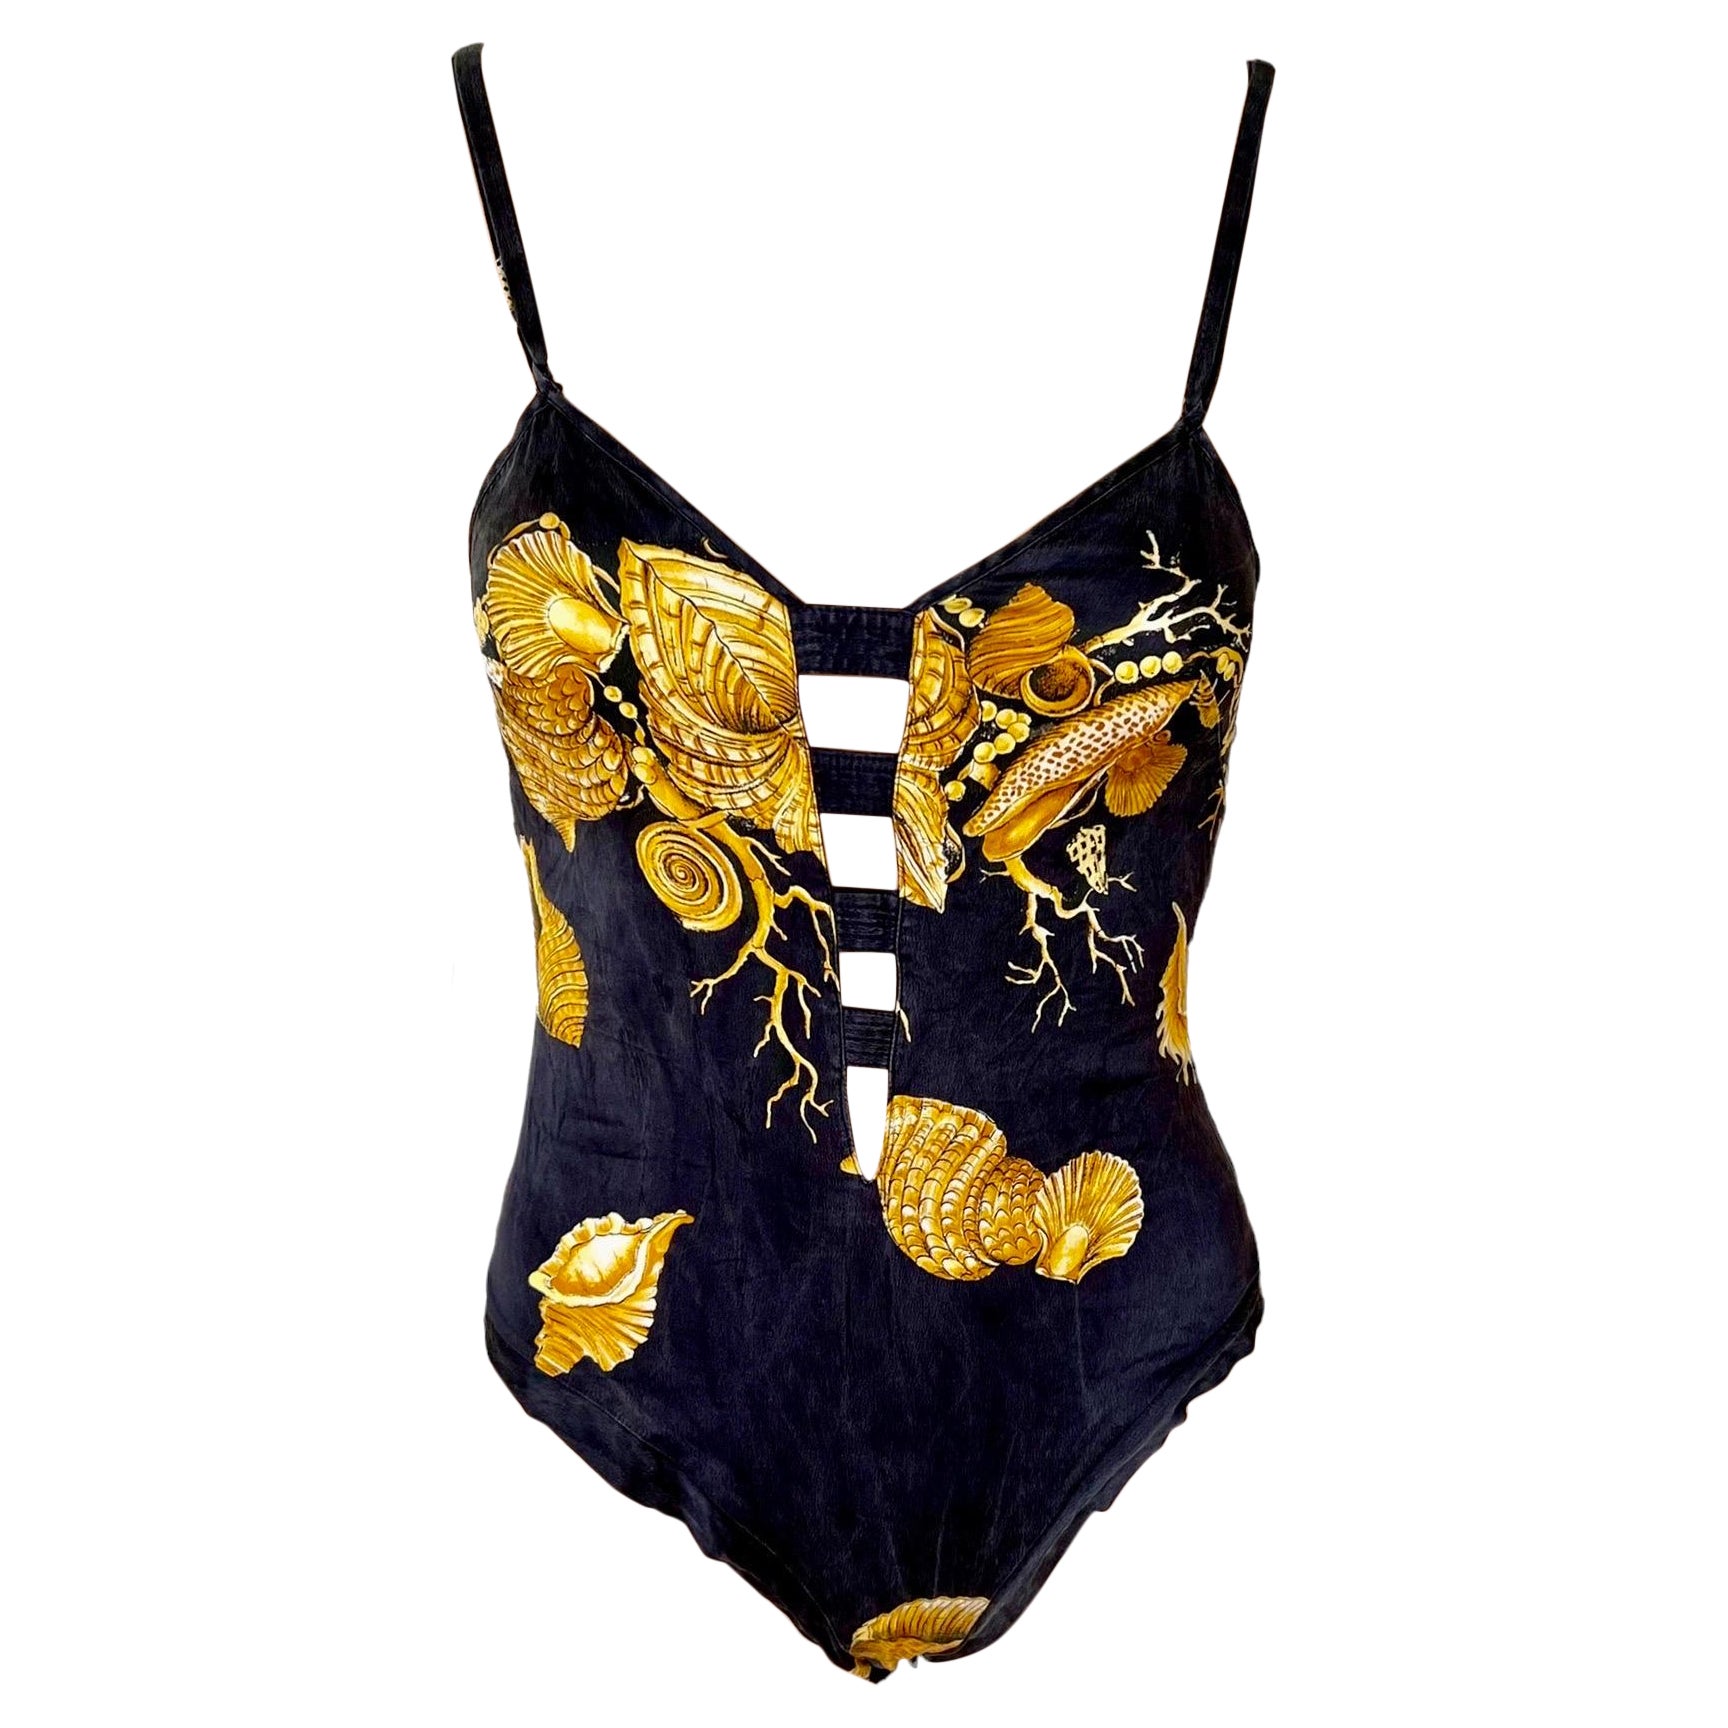 Gianni Versace S/S 1992 Vintage Plunging Baroque Print Sheer Lace Bodysuit Top 